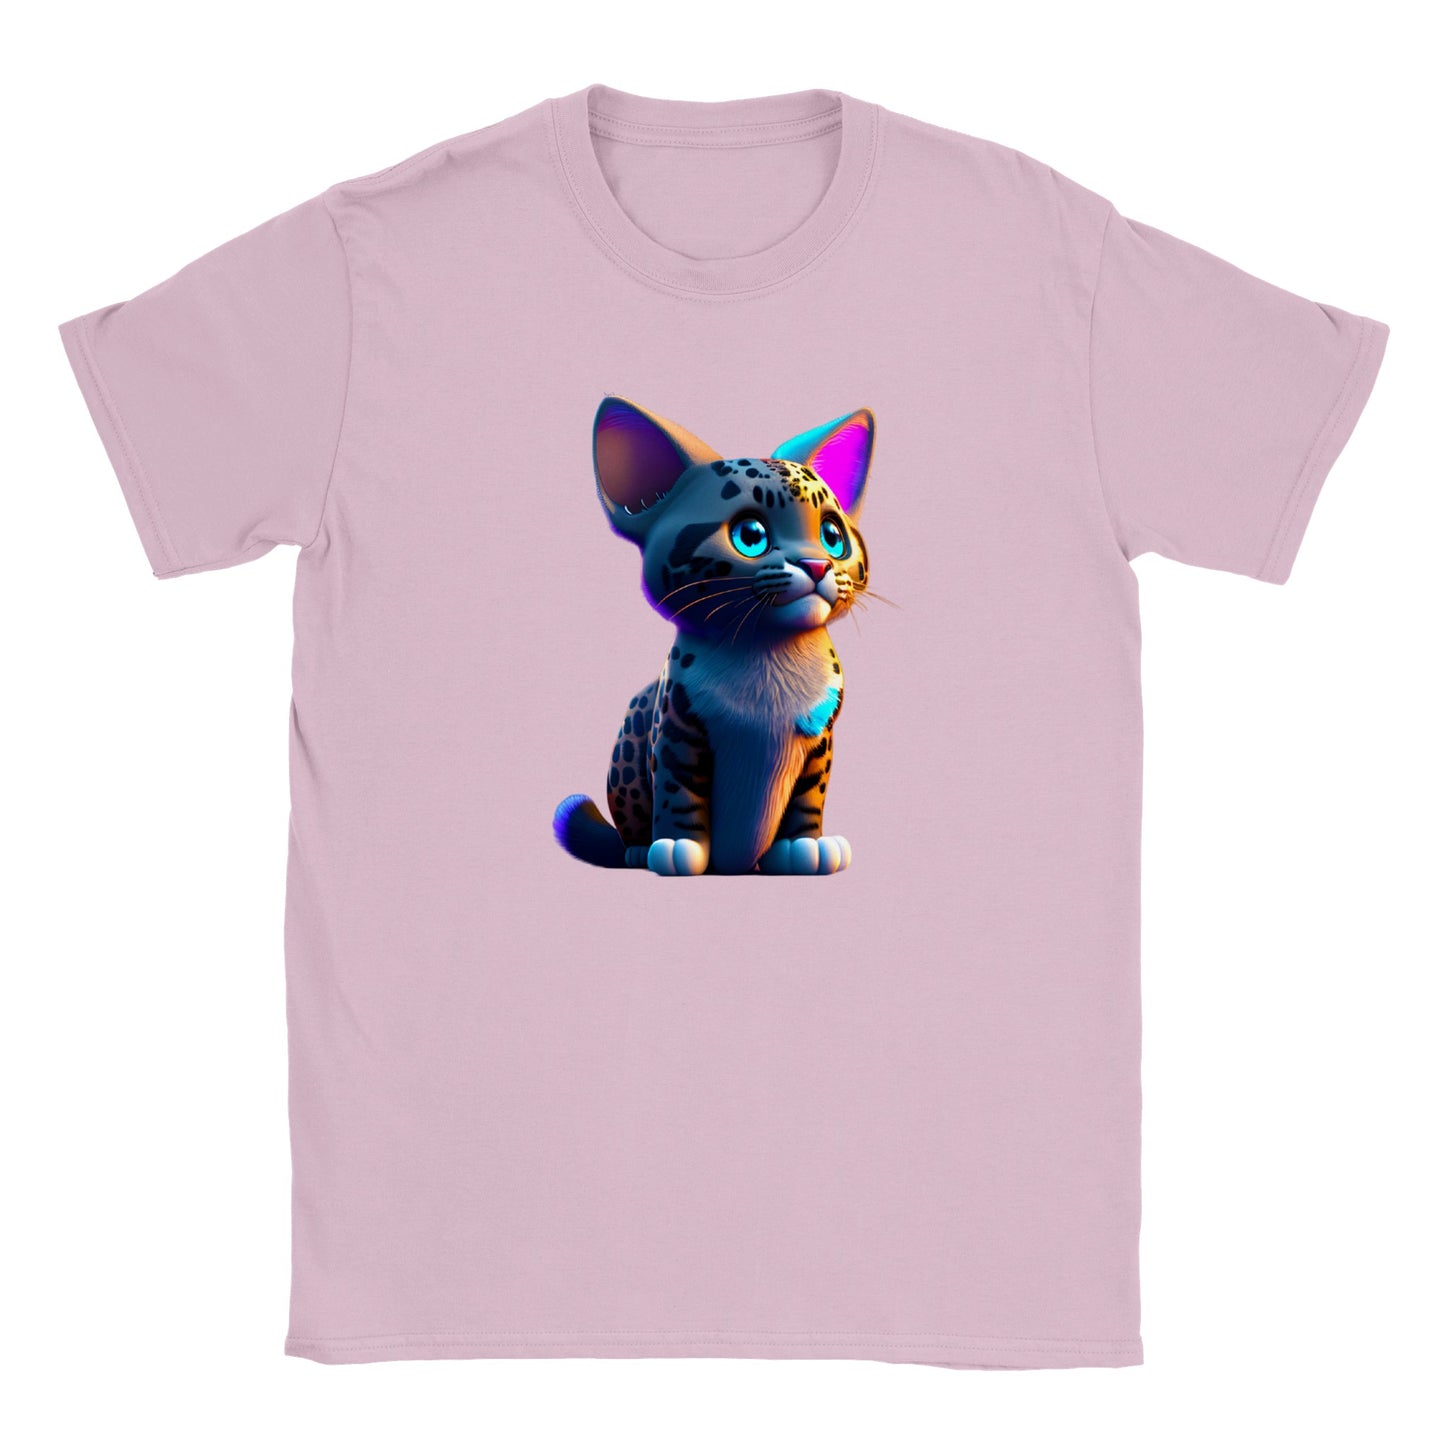 Adorable, Cool, Cute Cats and Kittens Toy - Classic Kids Crewneck T-Shirt 37